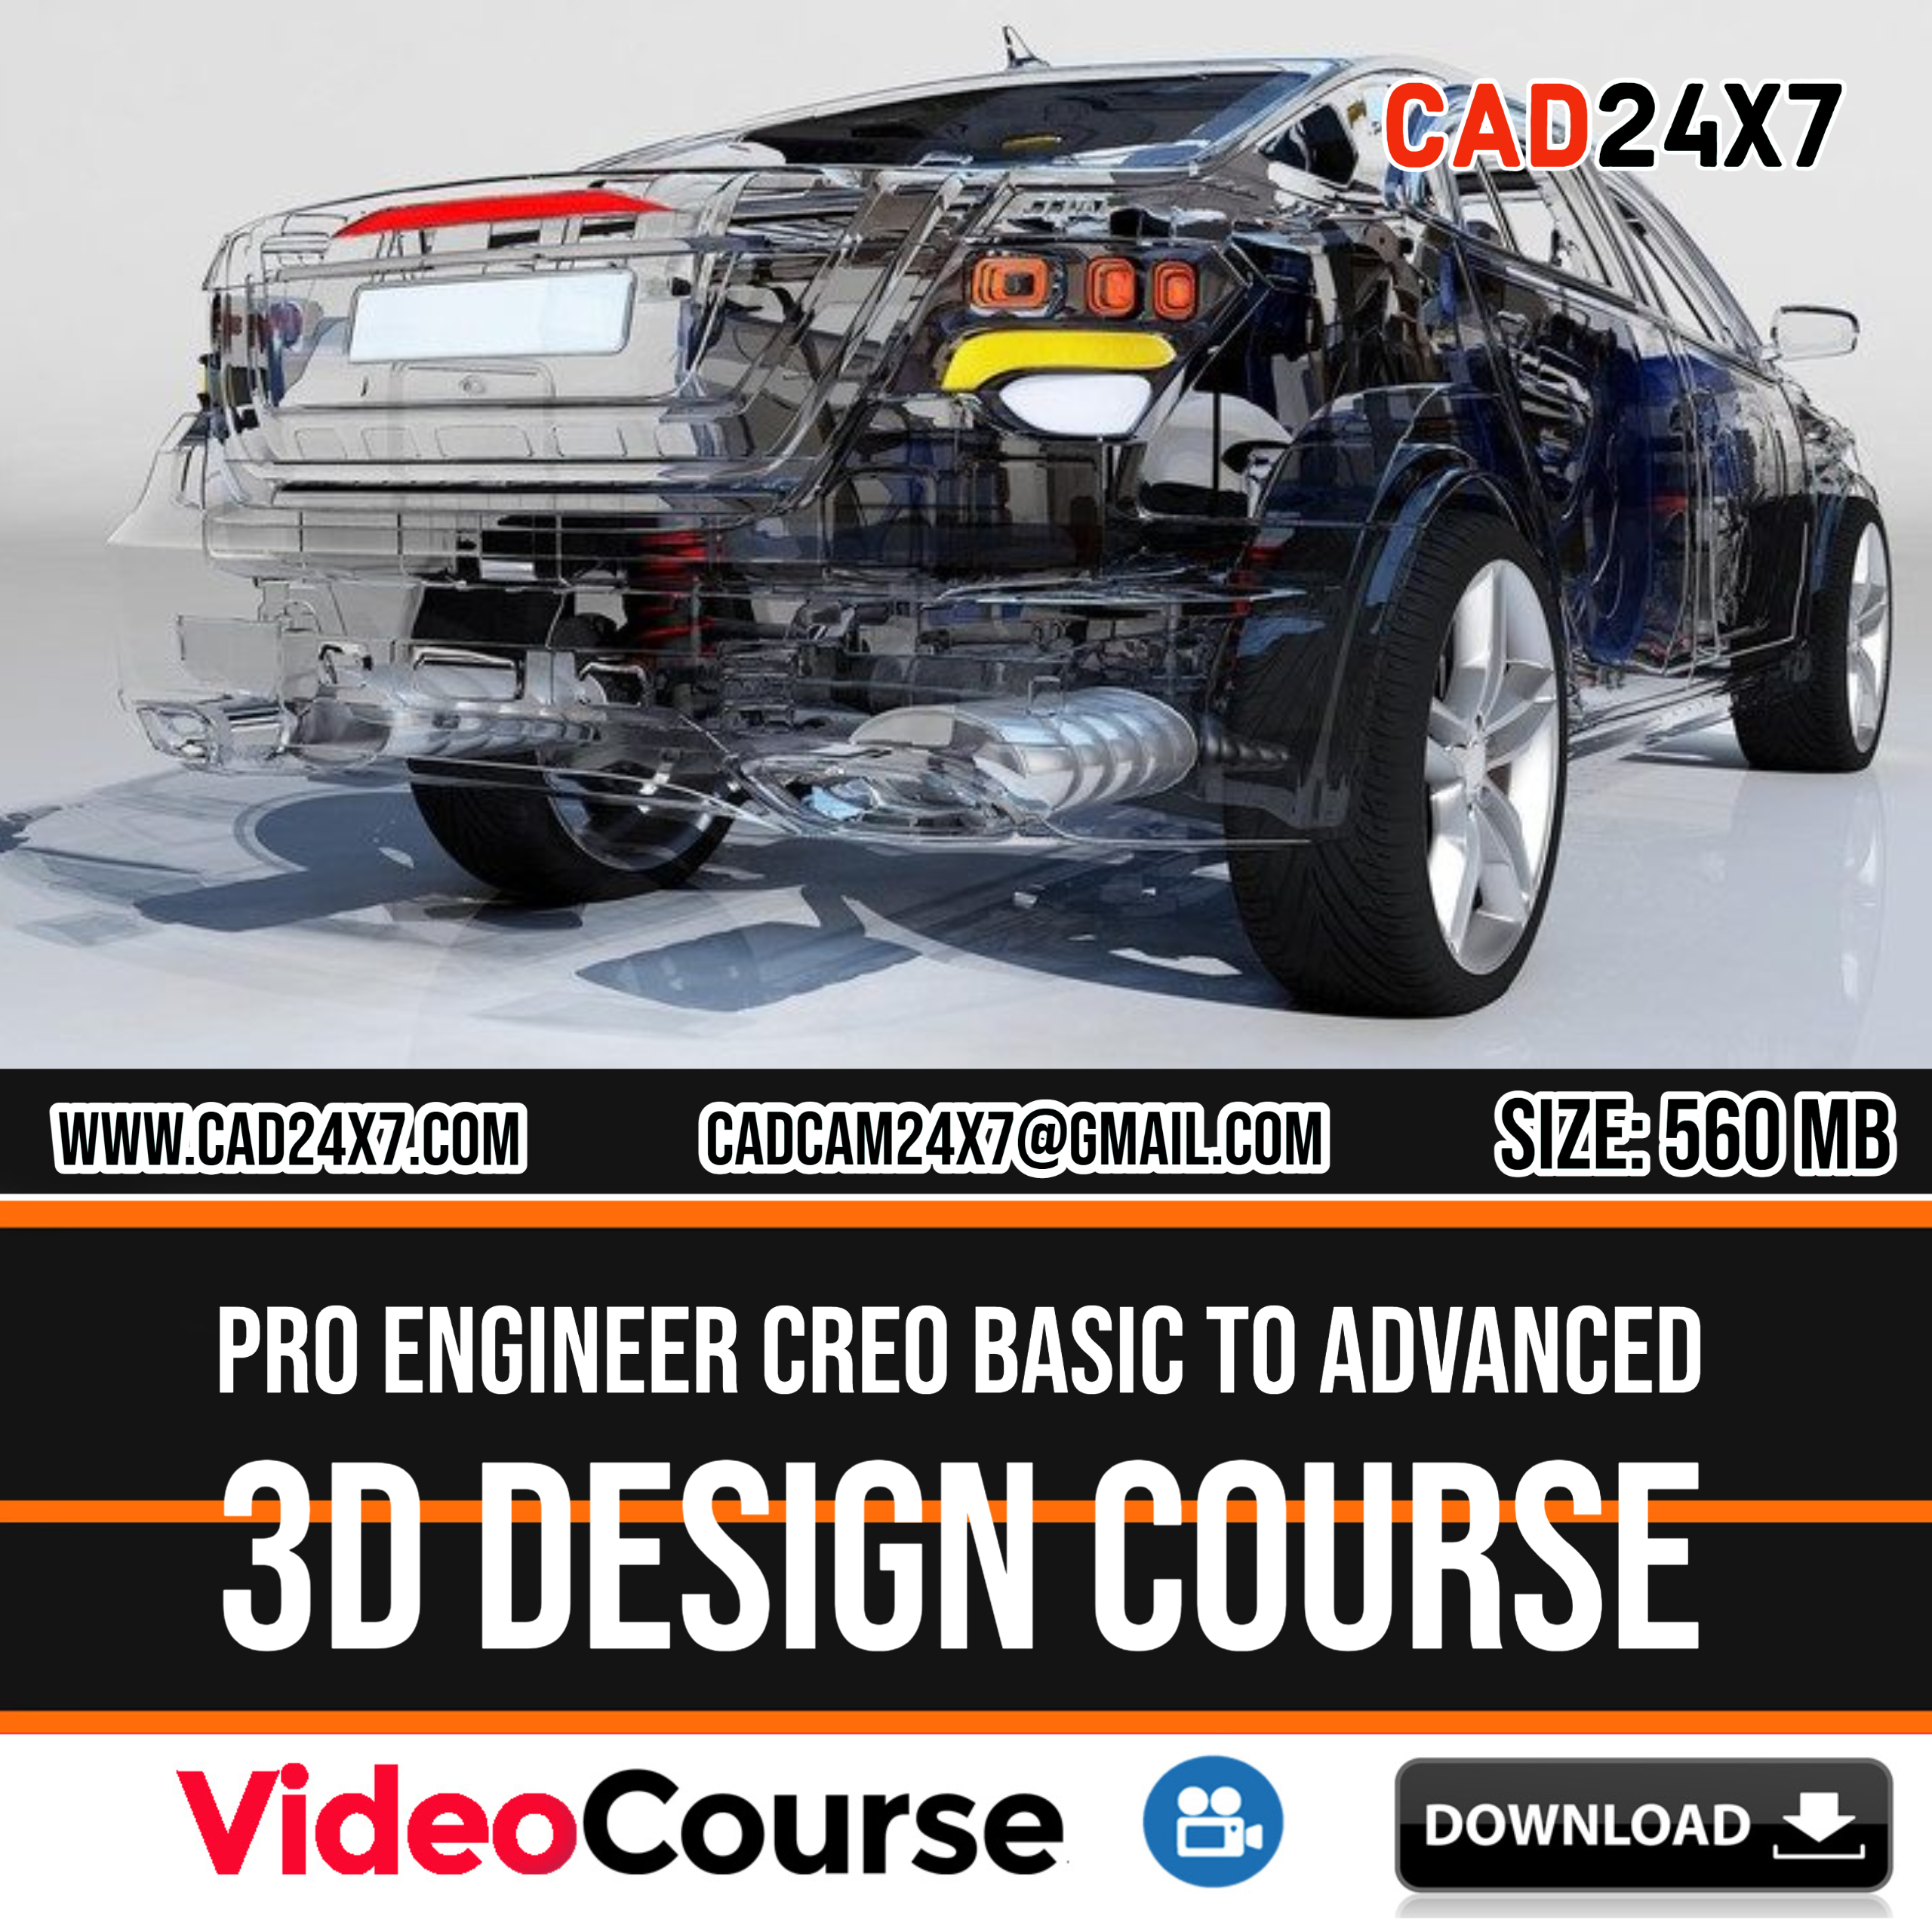 Pro Engineer Creo Basic to advanced 3D design course